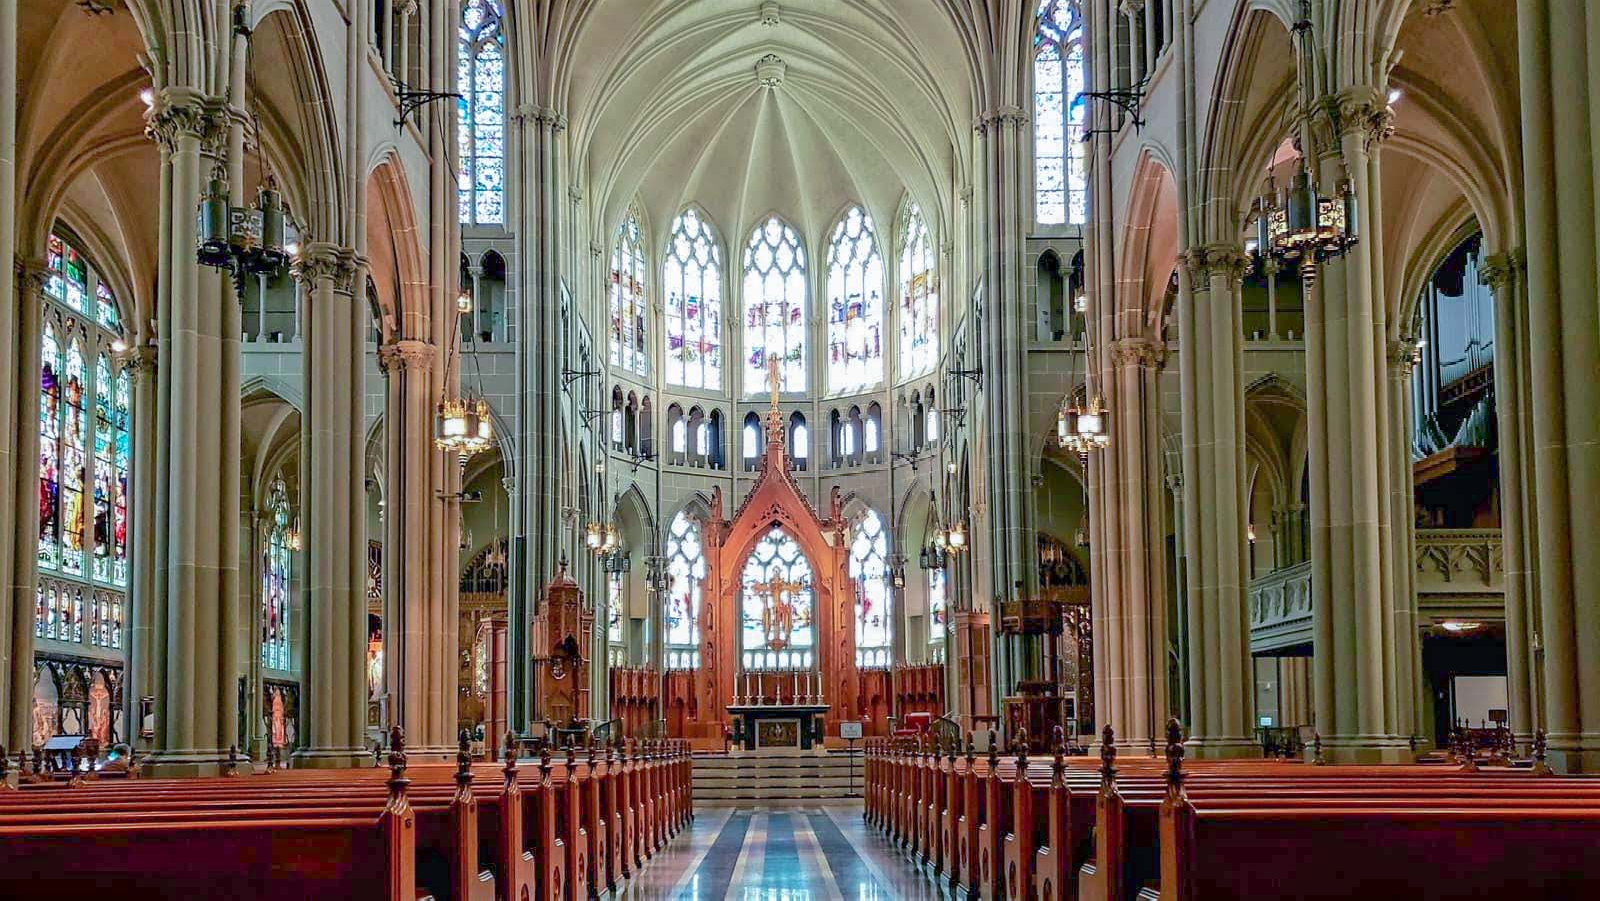 Framed by huge columns, the main nave soars to 85 feet above the church's marble and hand-carved wood altar.